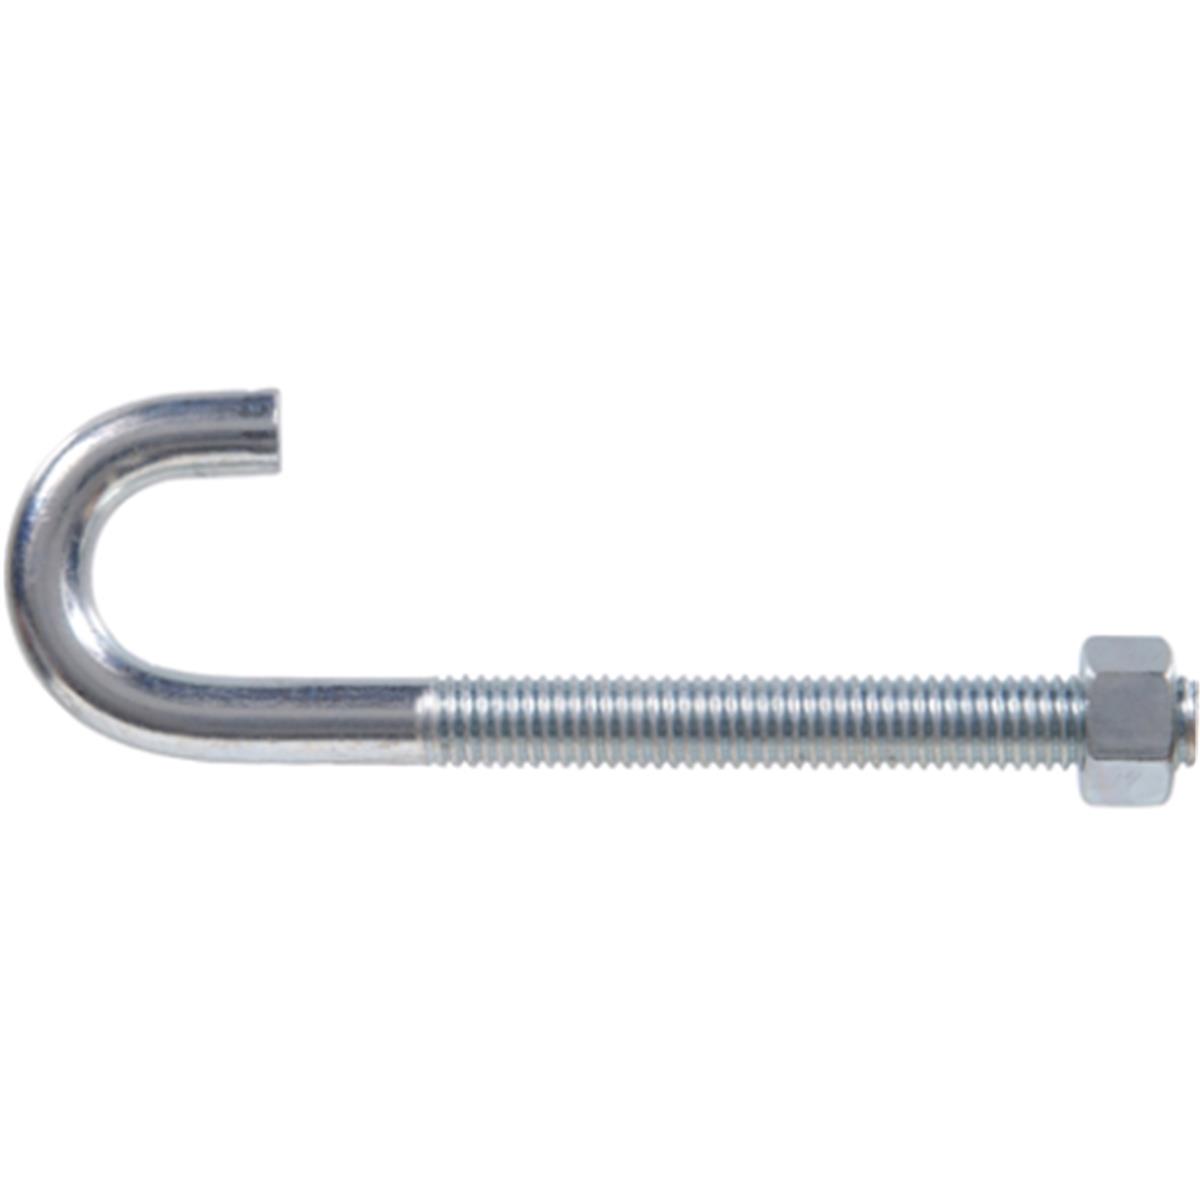 12-24 X 2.12 In. Zinc Plated J-bolt With Nut, Pack Of 25